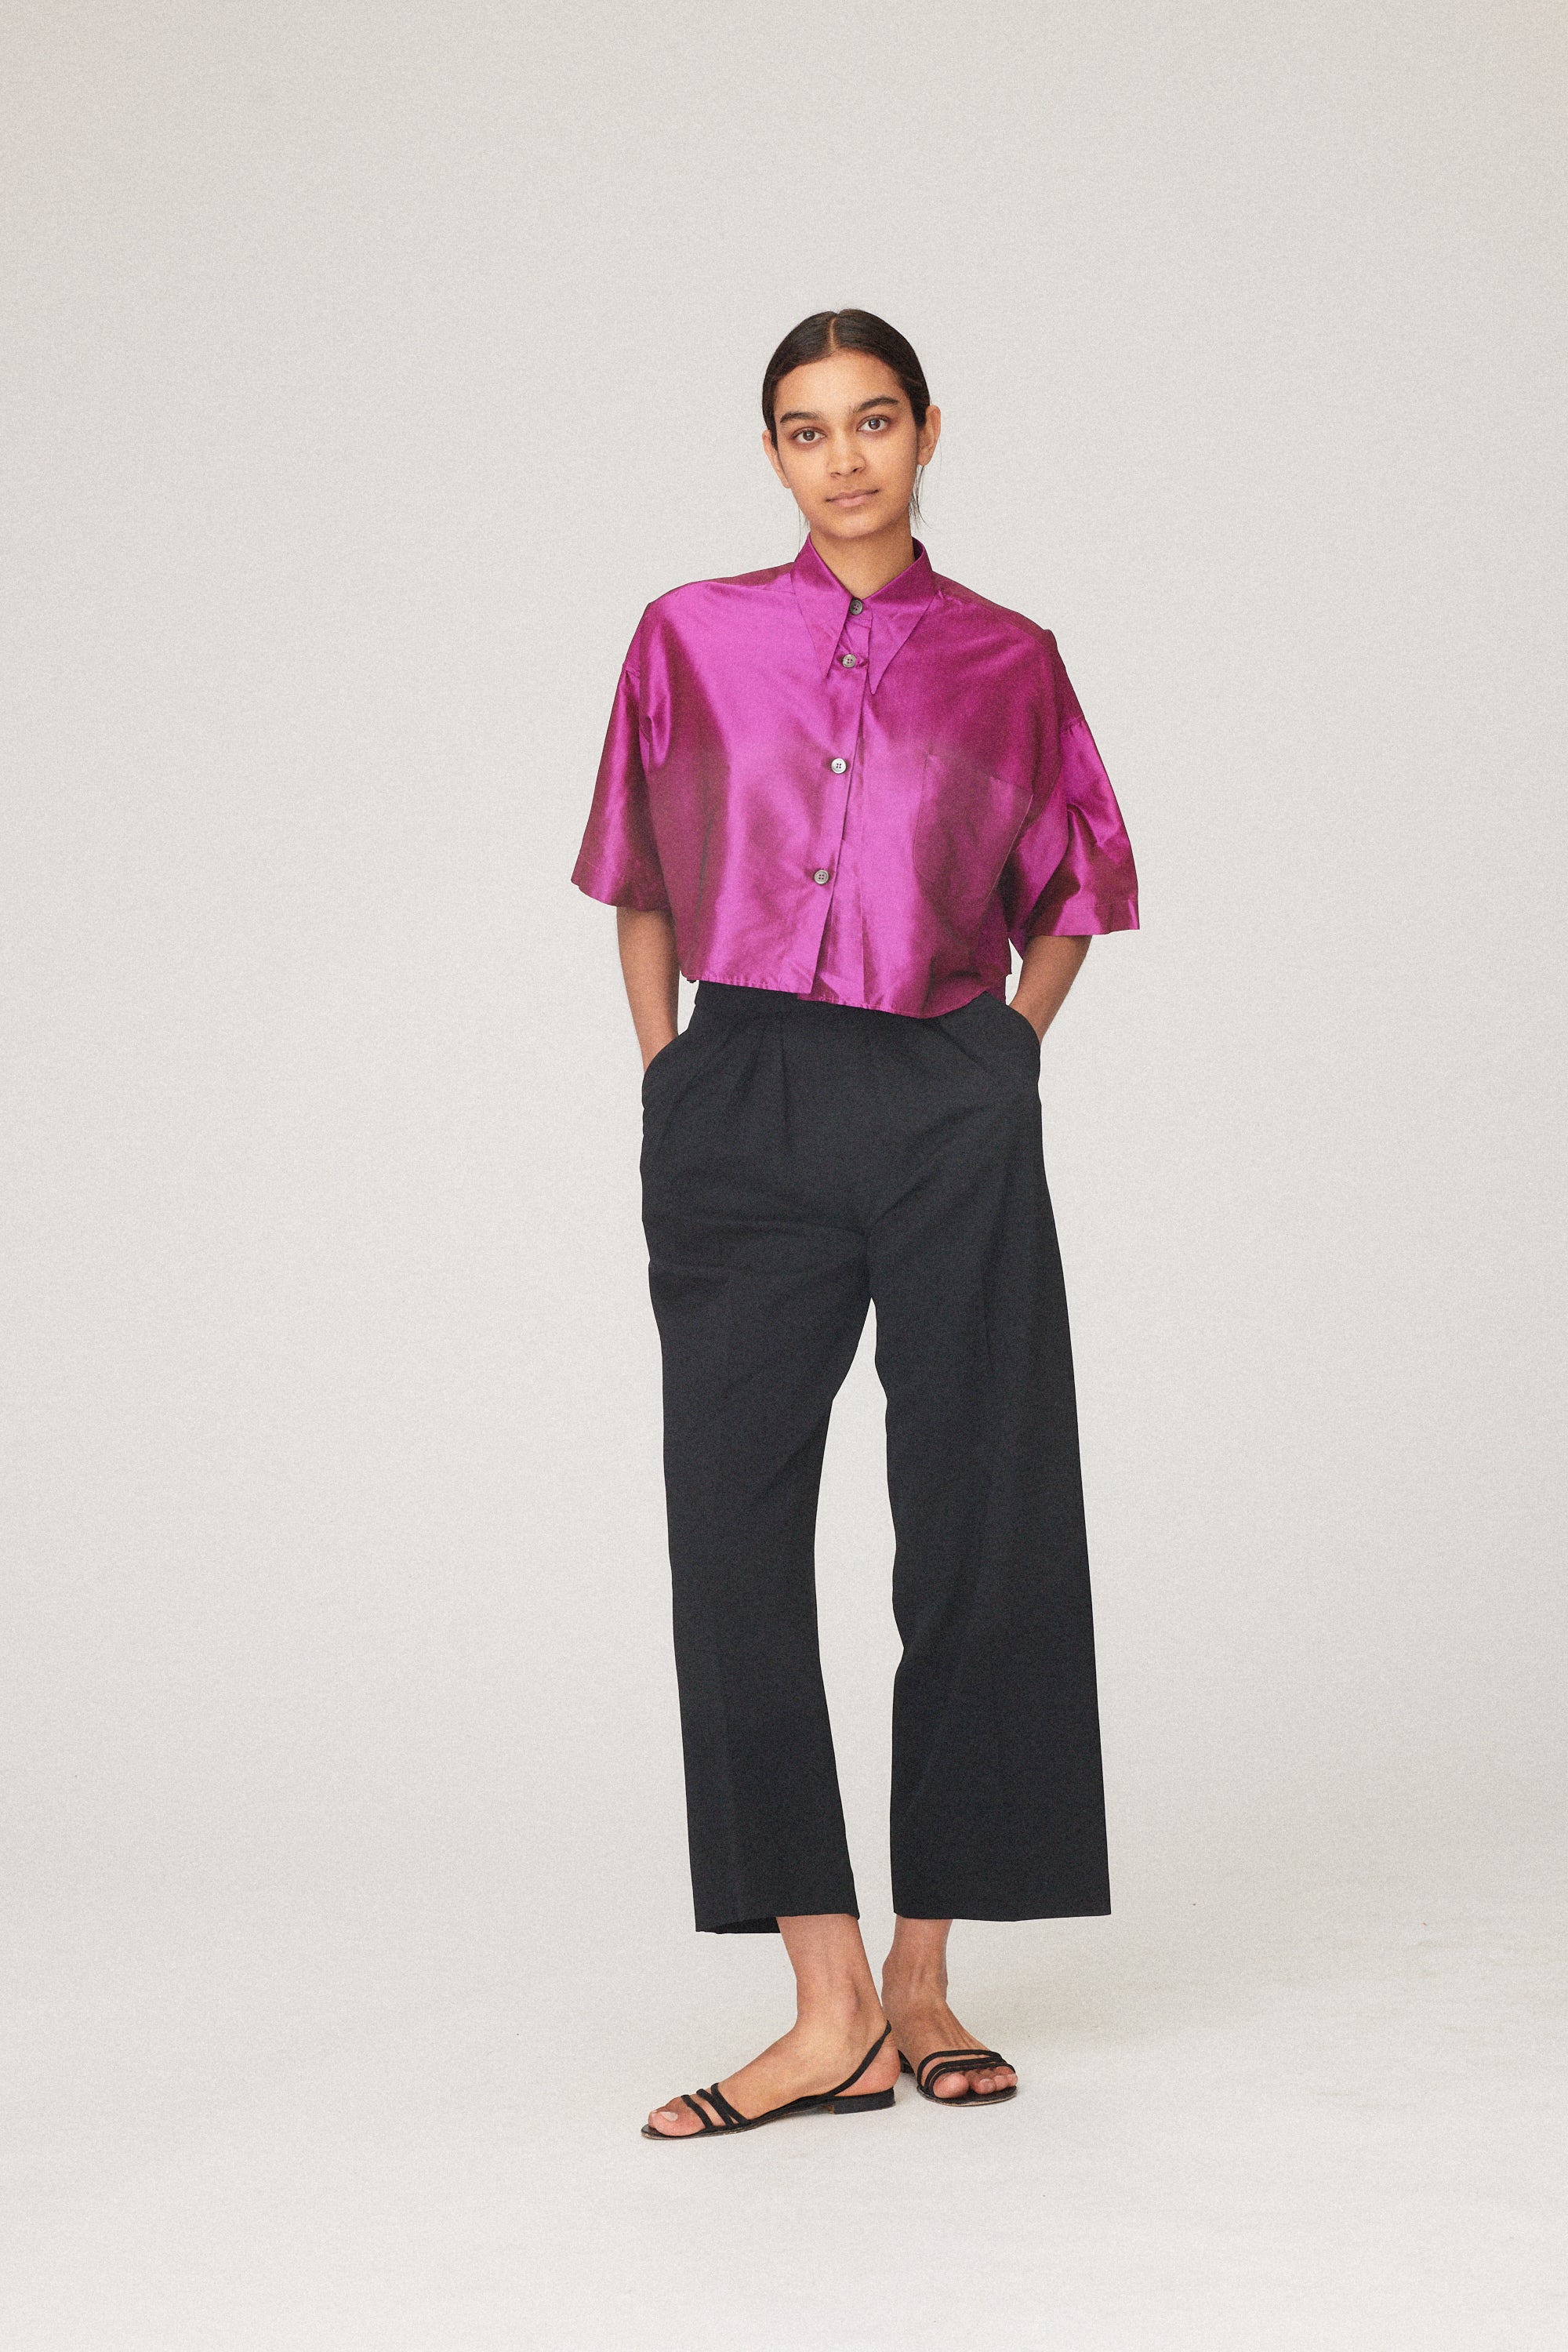 YSL Black Pleated Front Trousers - Desert Vintage